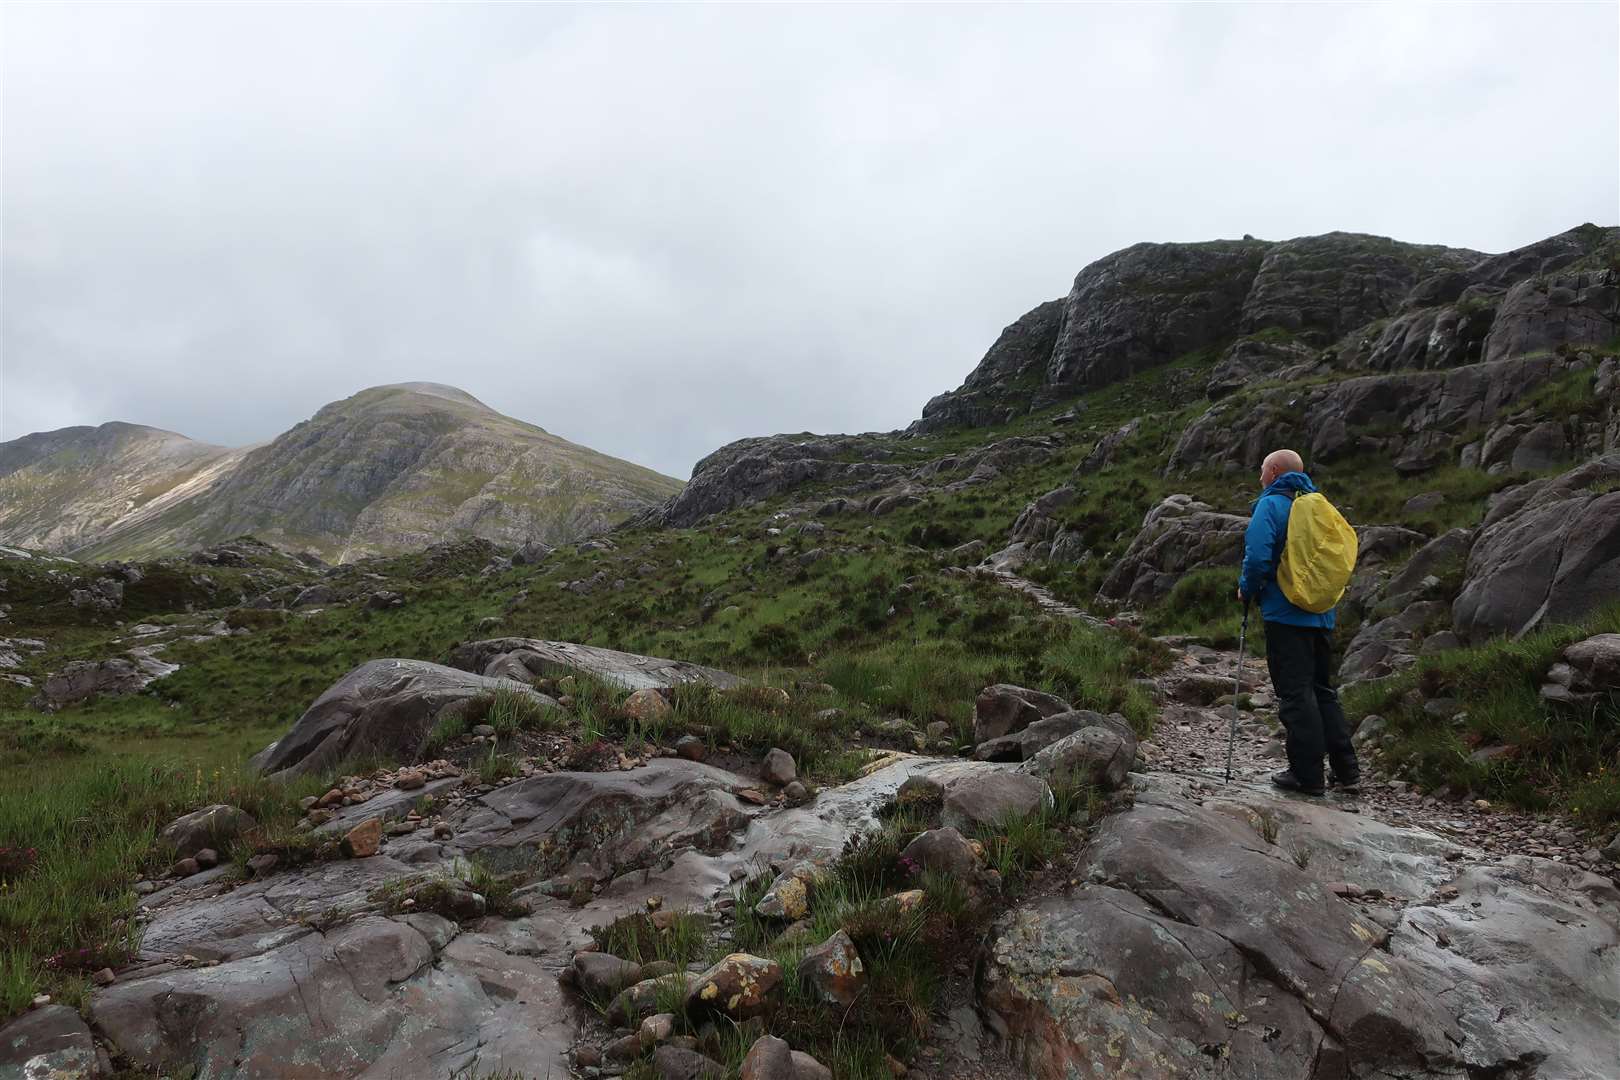 Peter at an unsocial distance heading up to Drochaid Coire Lair.